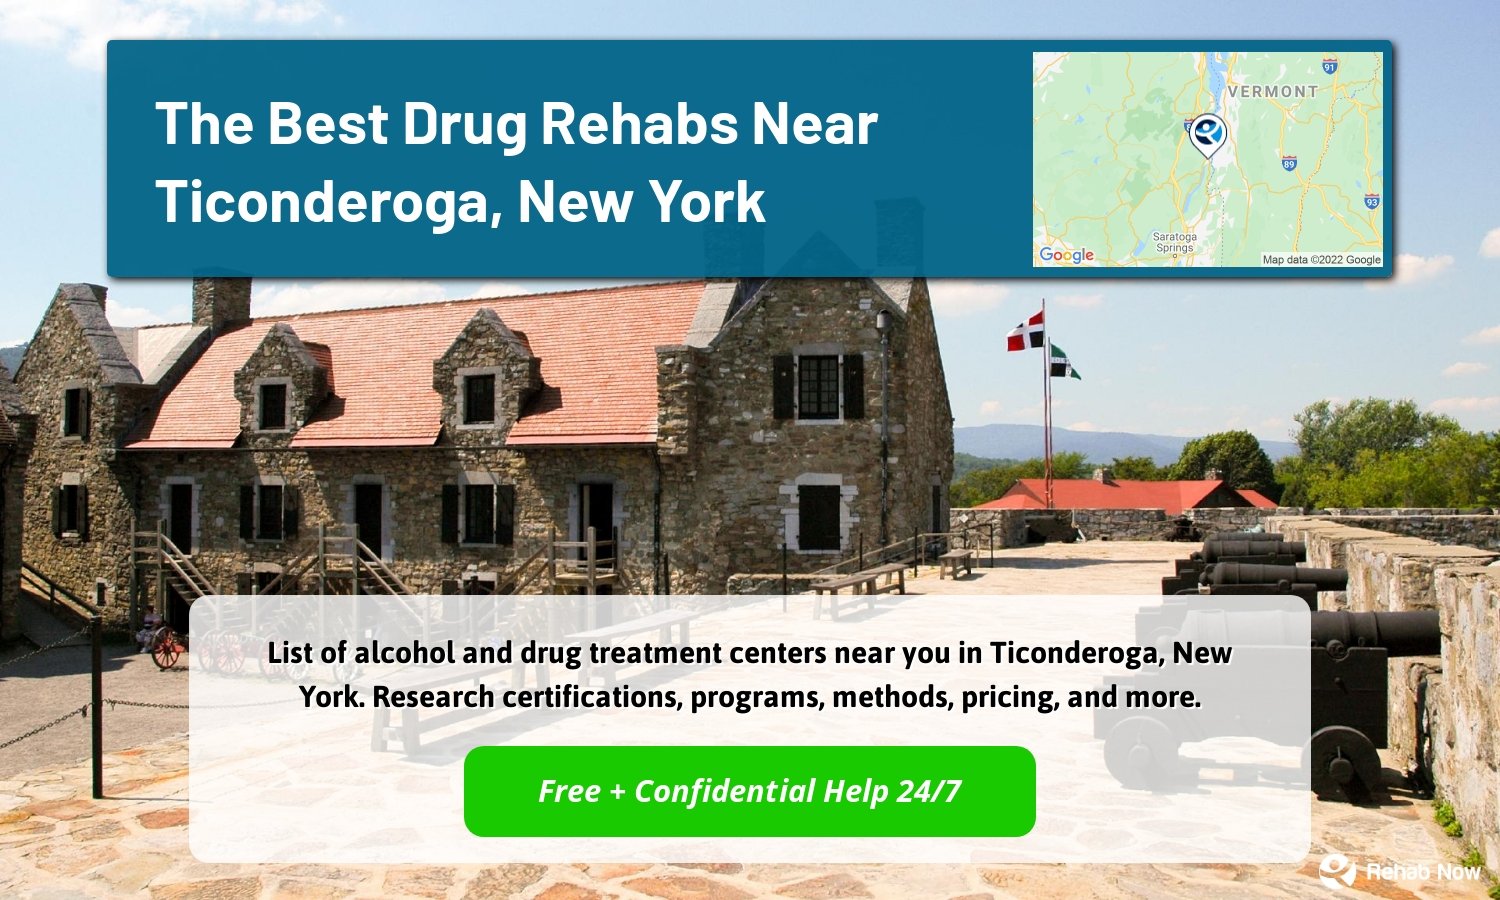 List of alcohol and drug treatment centers near you in Ticonderoga, New York. Research certifications, programs, methods, pricing, and more.